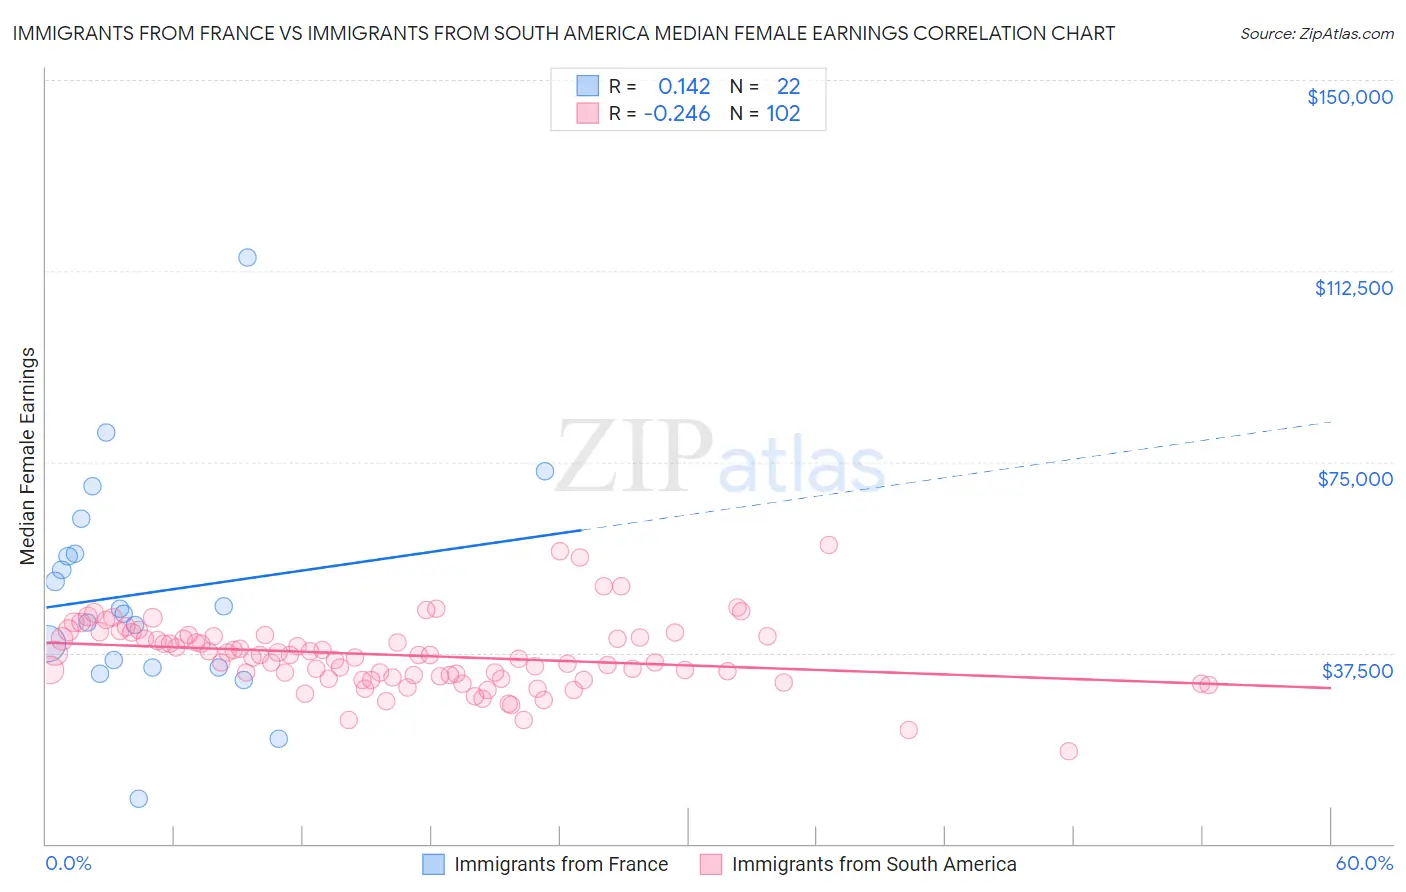 Immigrants from France vs Immigrants from South America Median Female Earnings